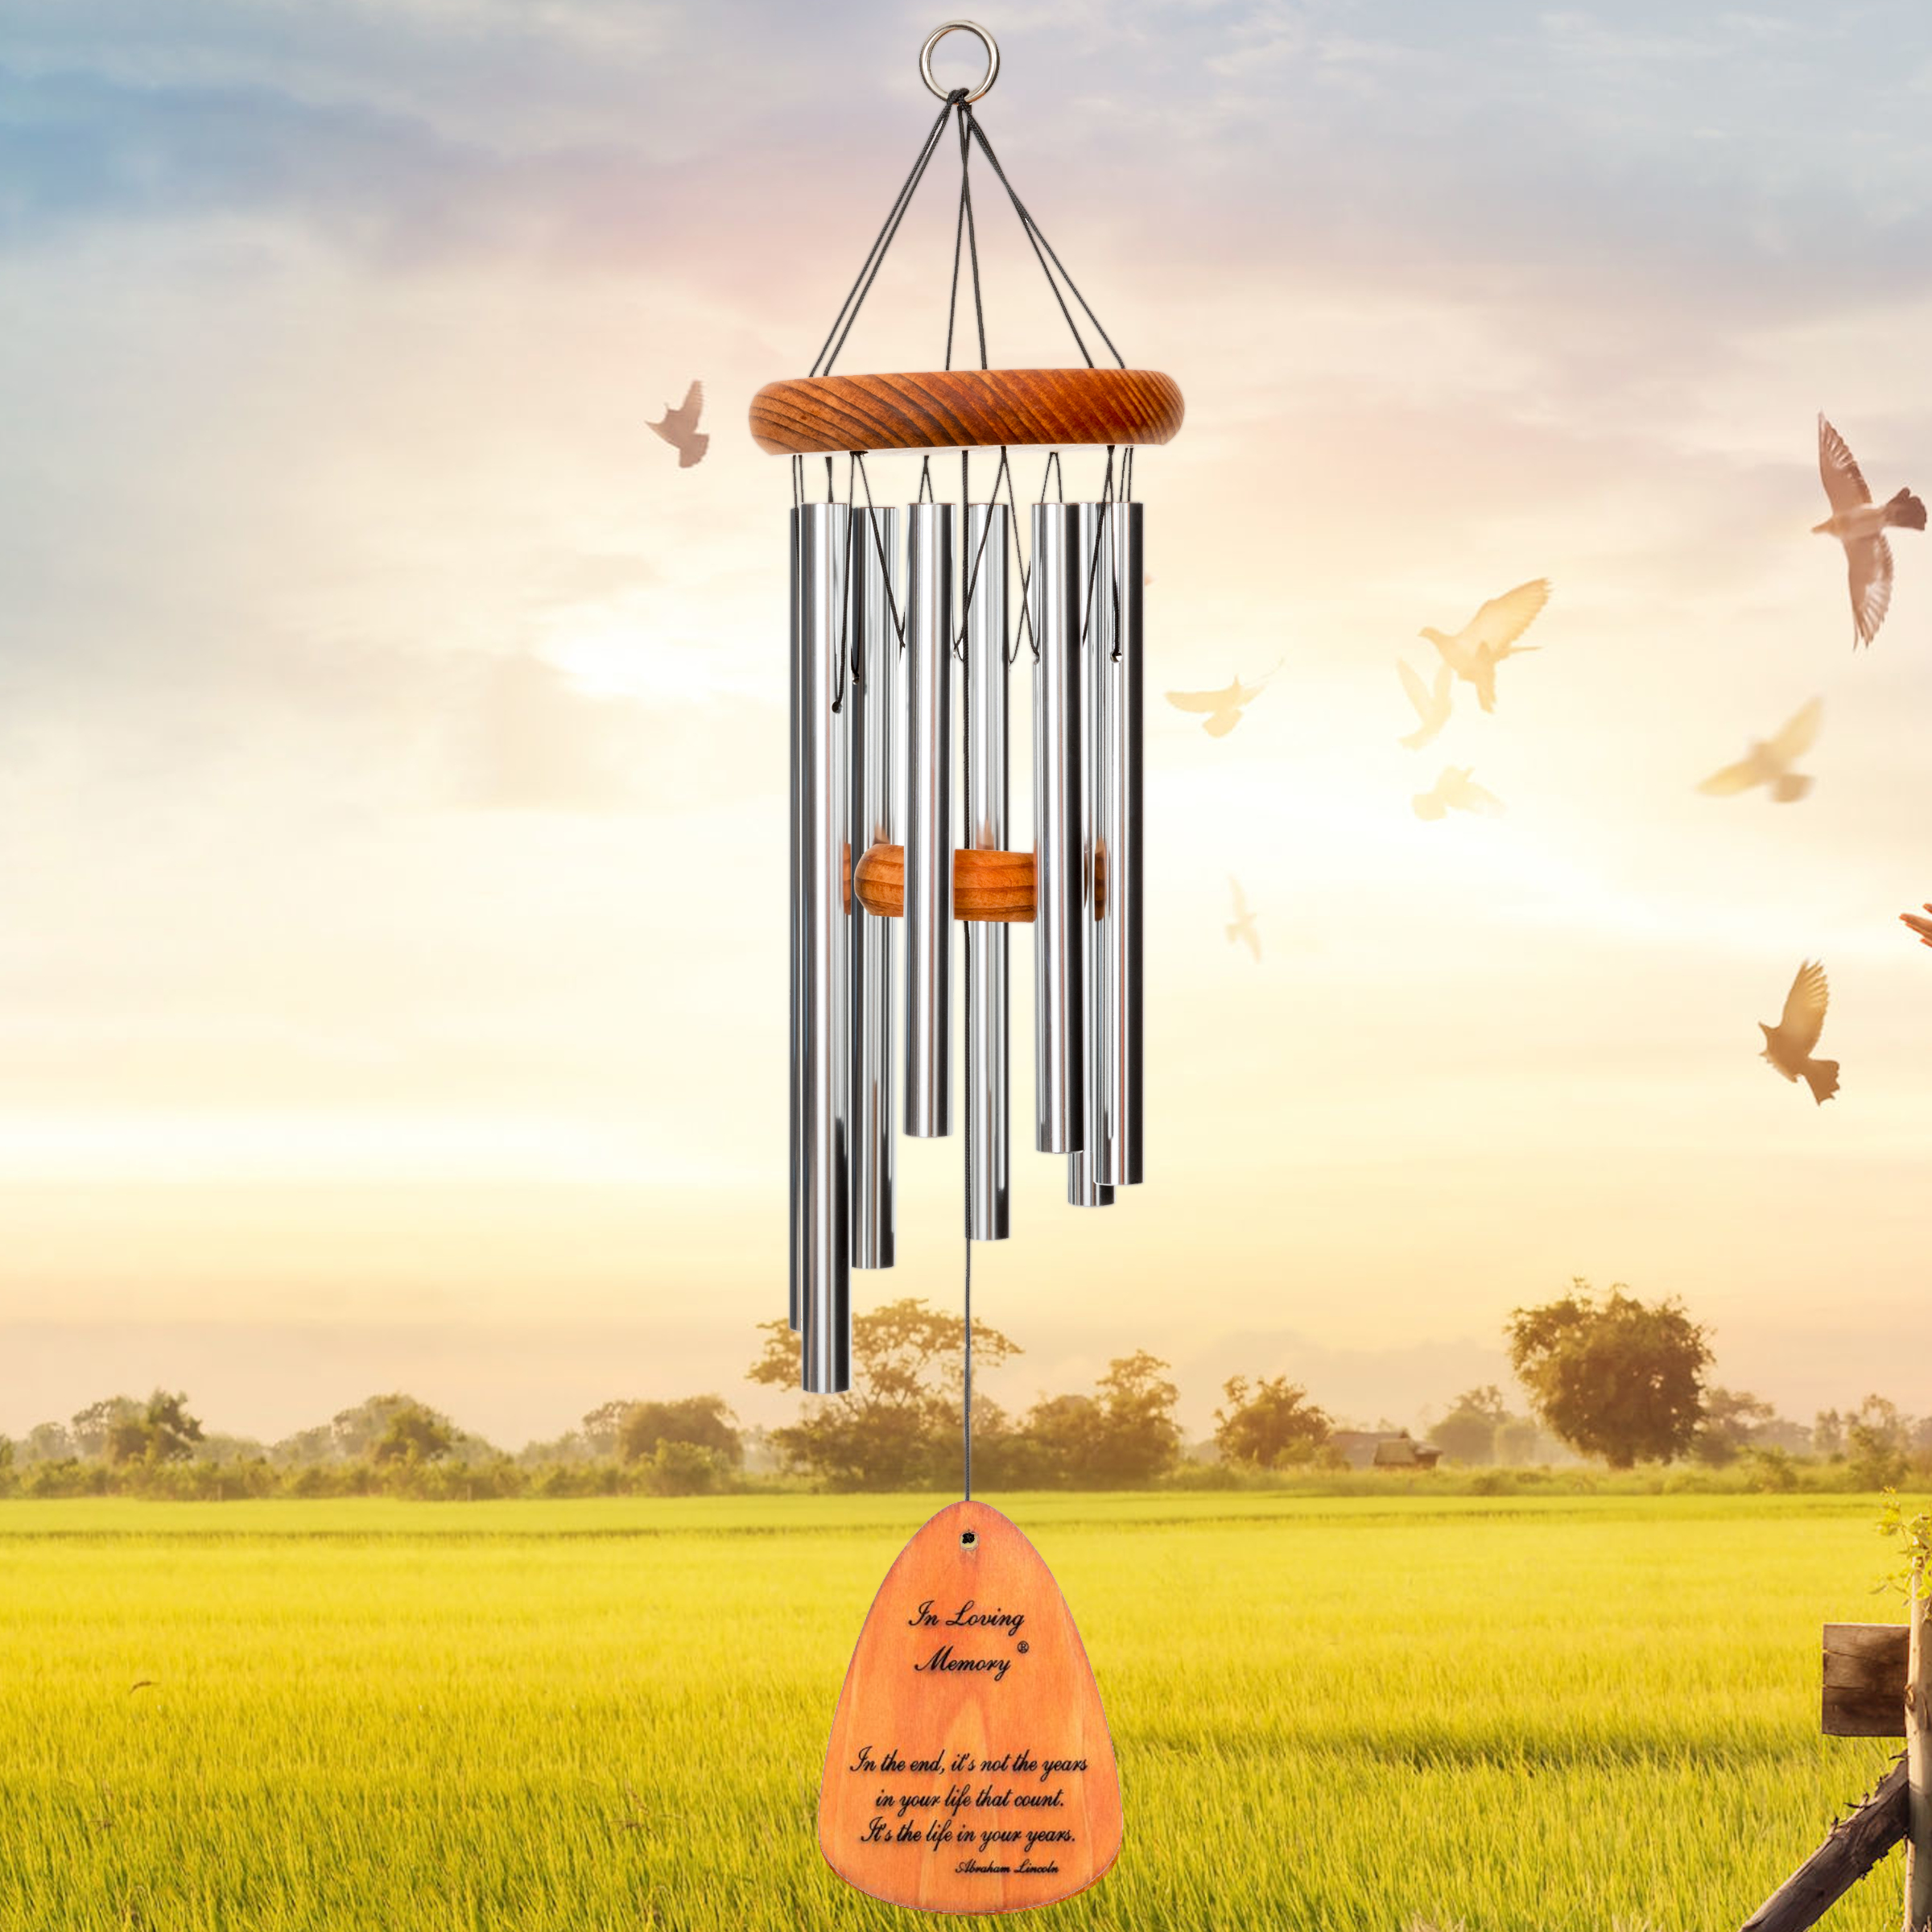 In Loving Memory 24 Inch Windchime - In the end, it's not the years... in Bronze